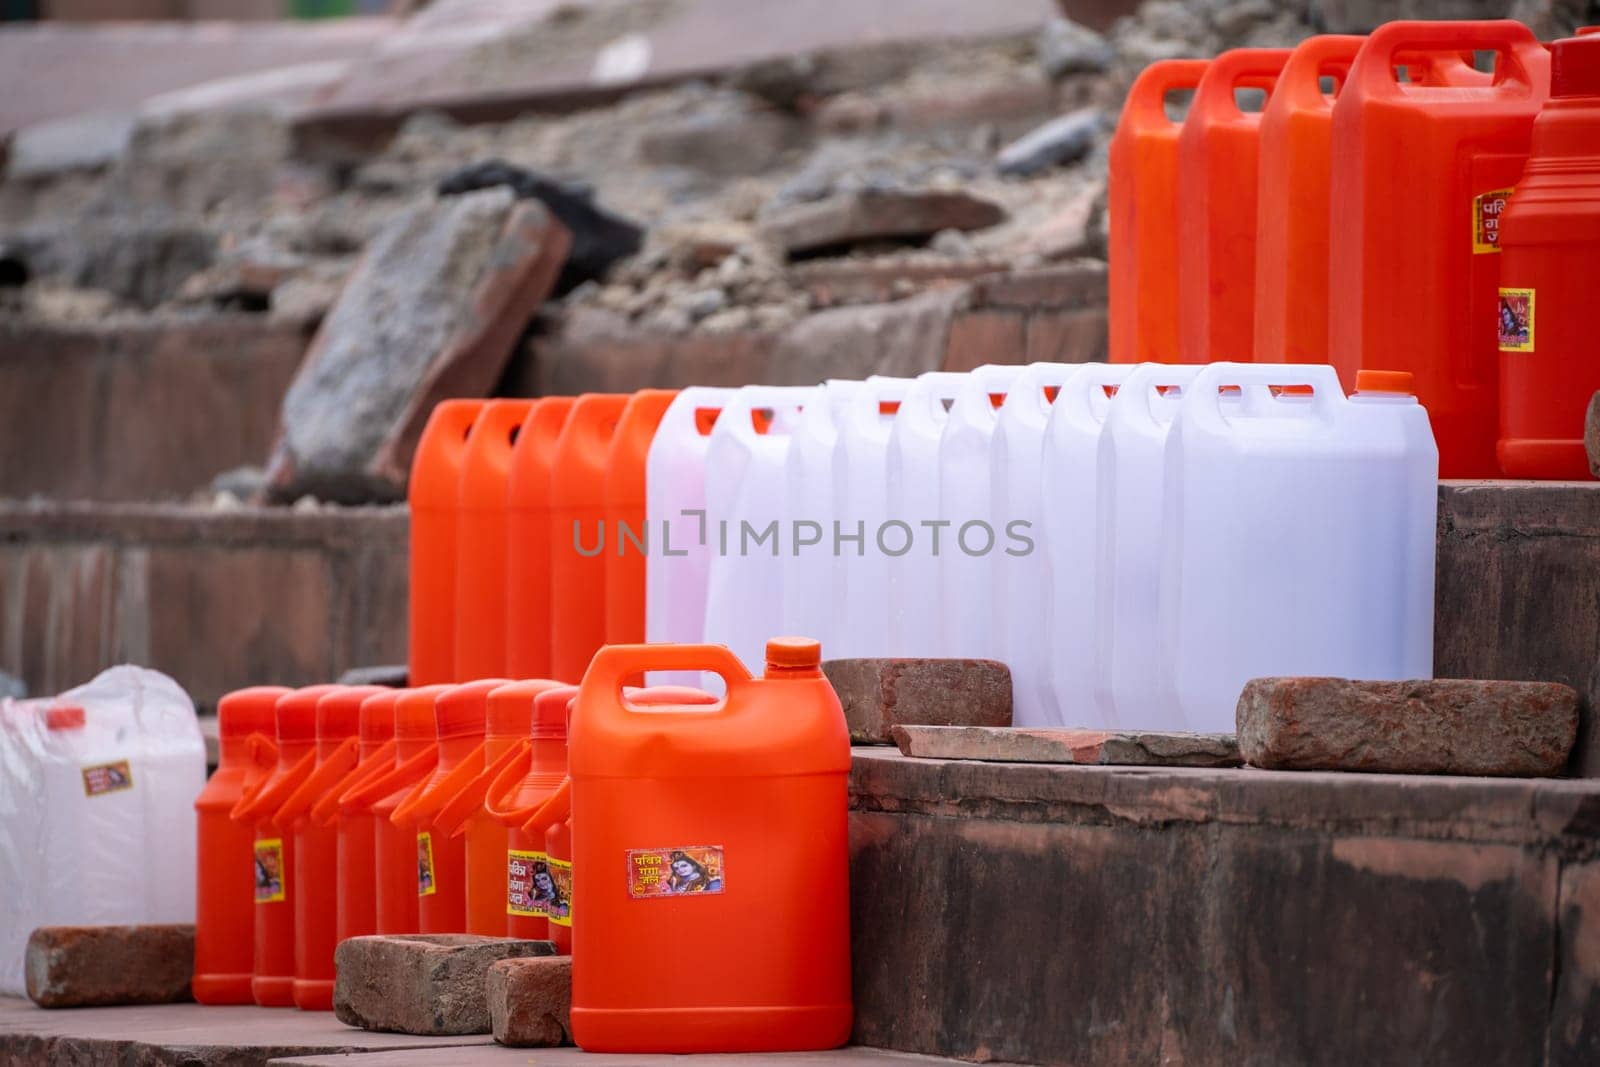 colorful plastic cans in orange saffron and white showing the traditional vessels used to fill holy water from ganga river to take home in India